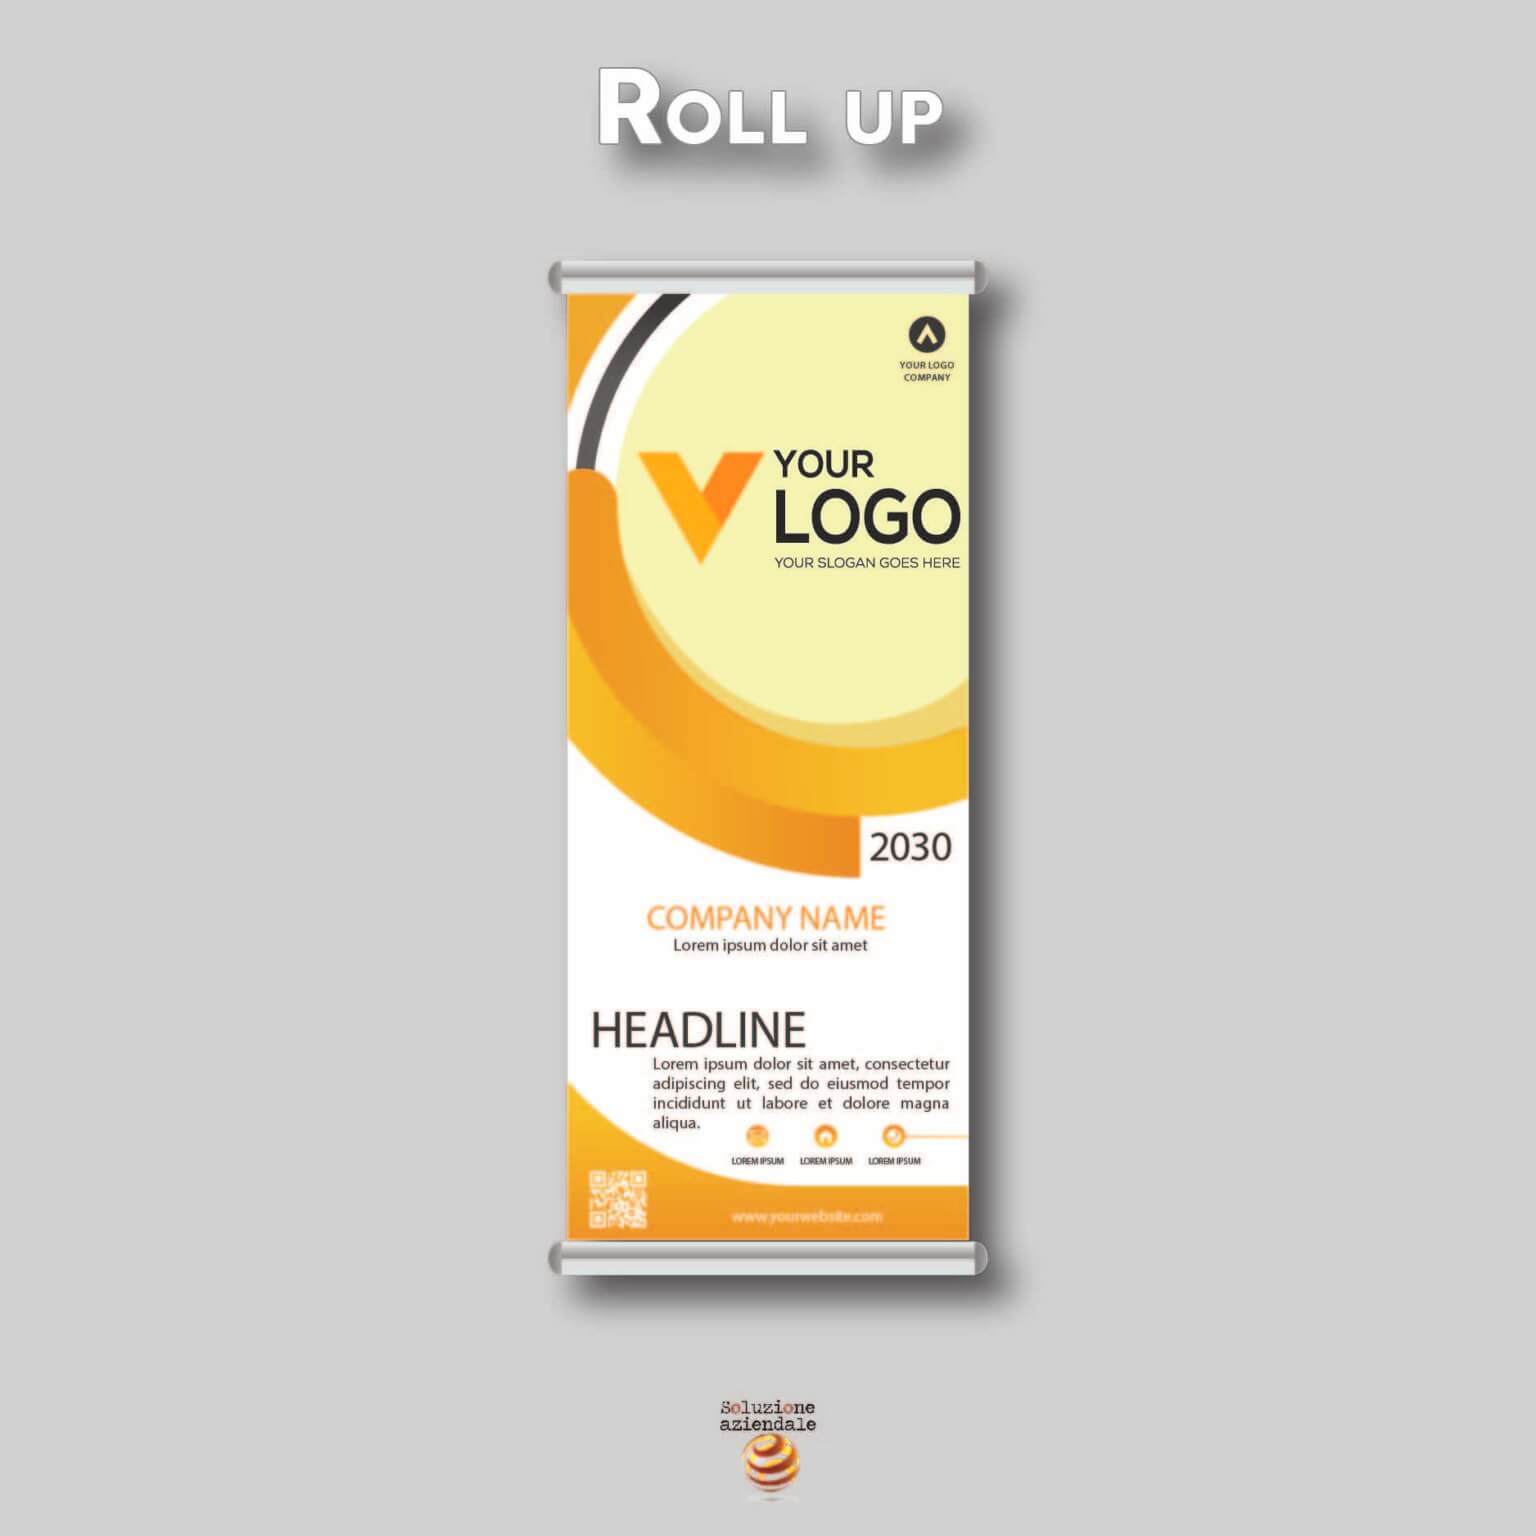 Roll up 450x450px